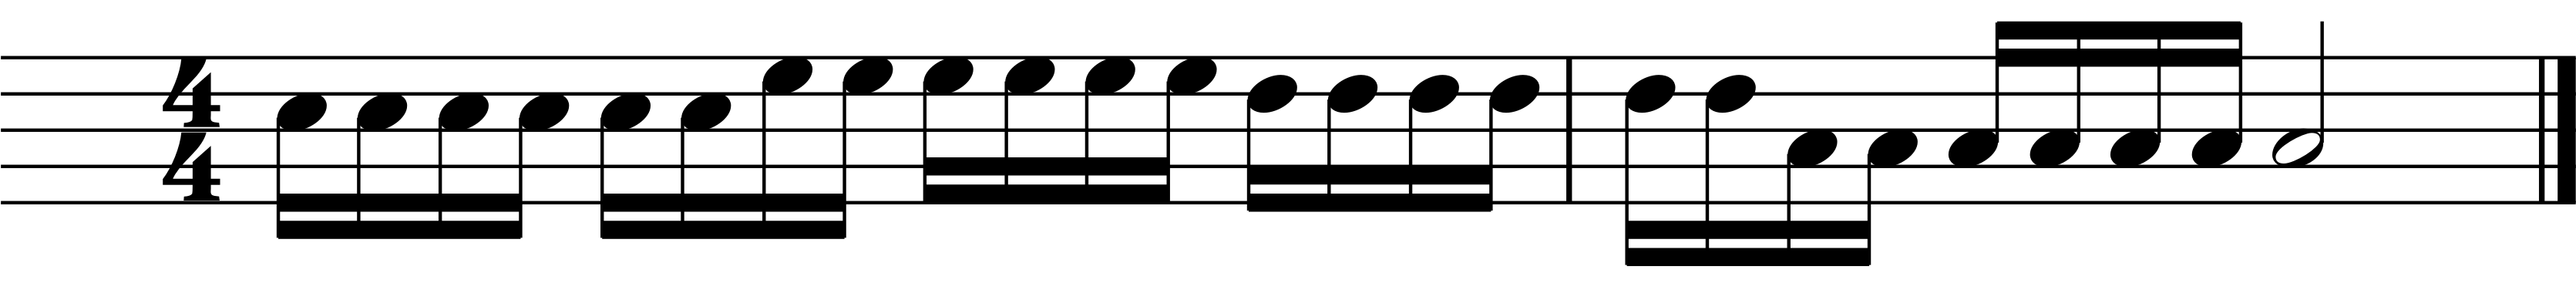 Single stroke roll orchestration in sixes